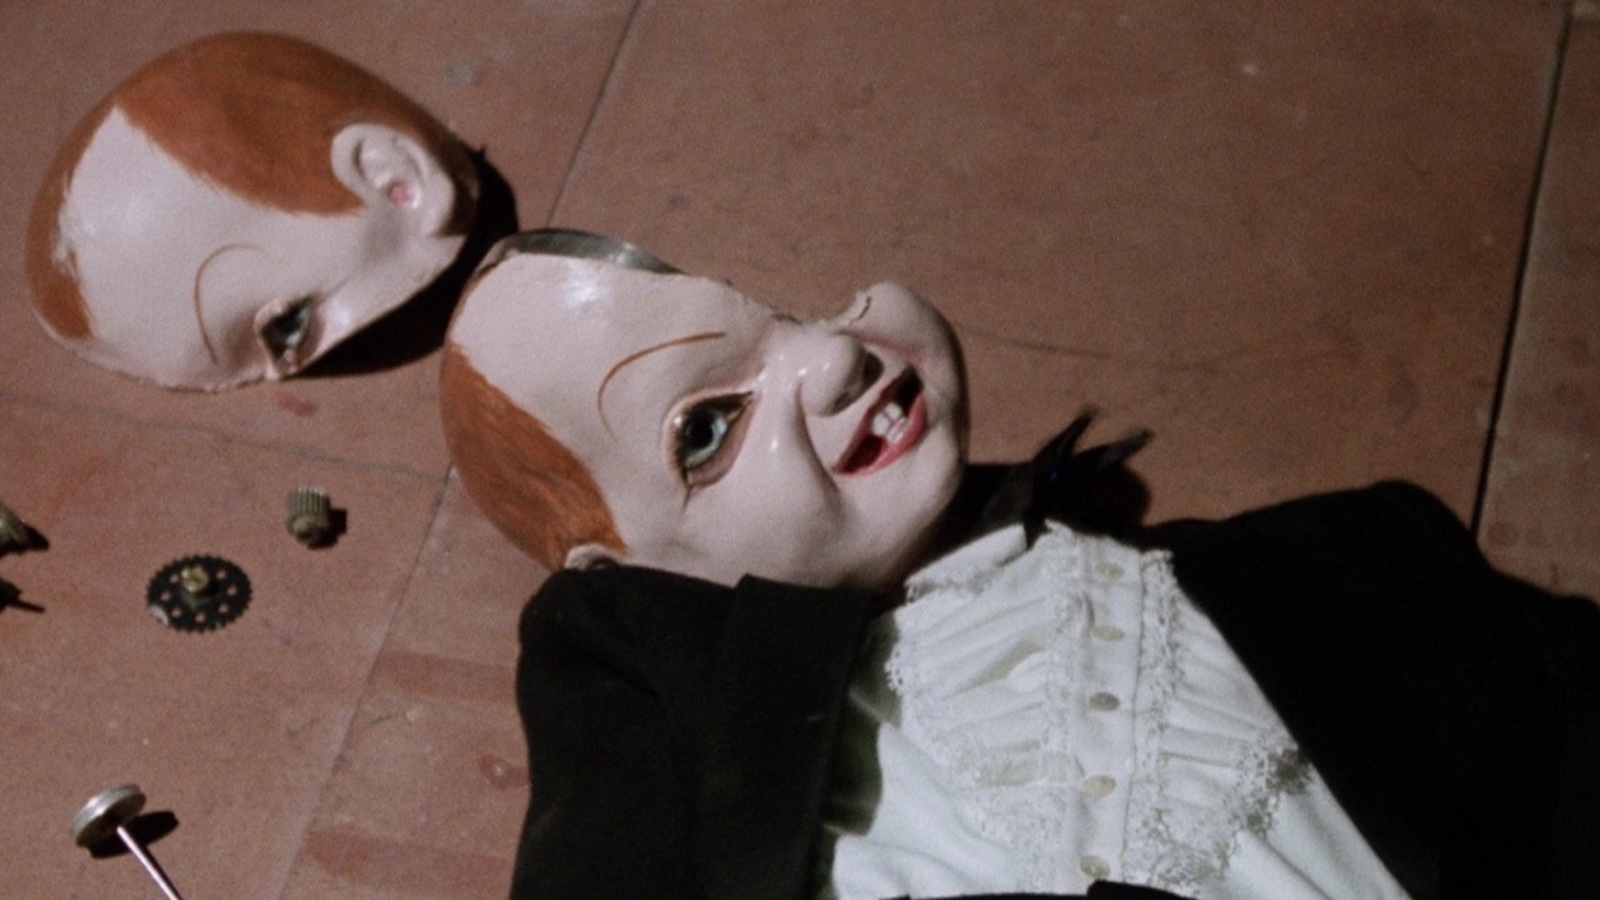 A broken dummy with its head cracked in two on the floor, looking up with a sinister expression